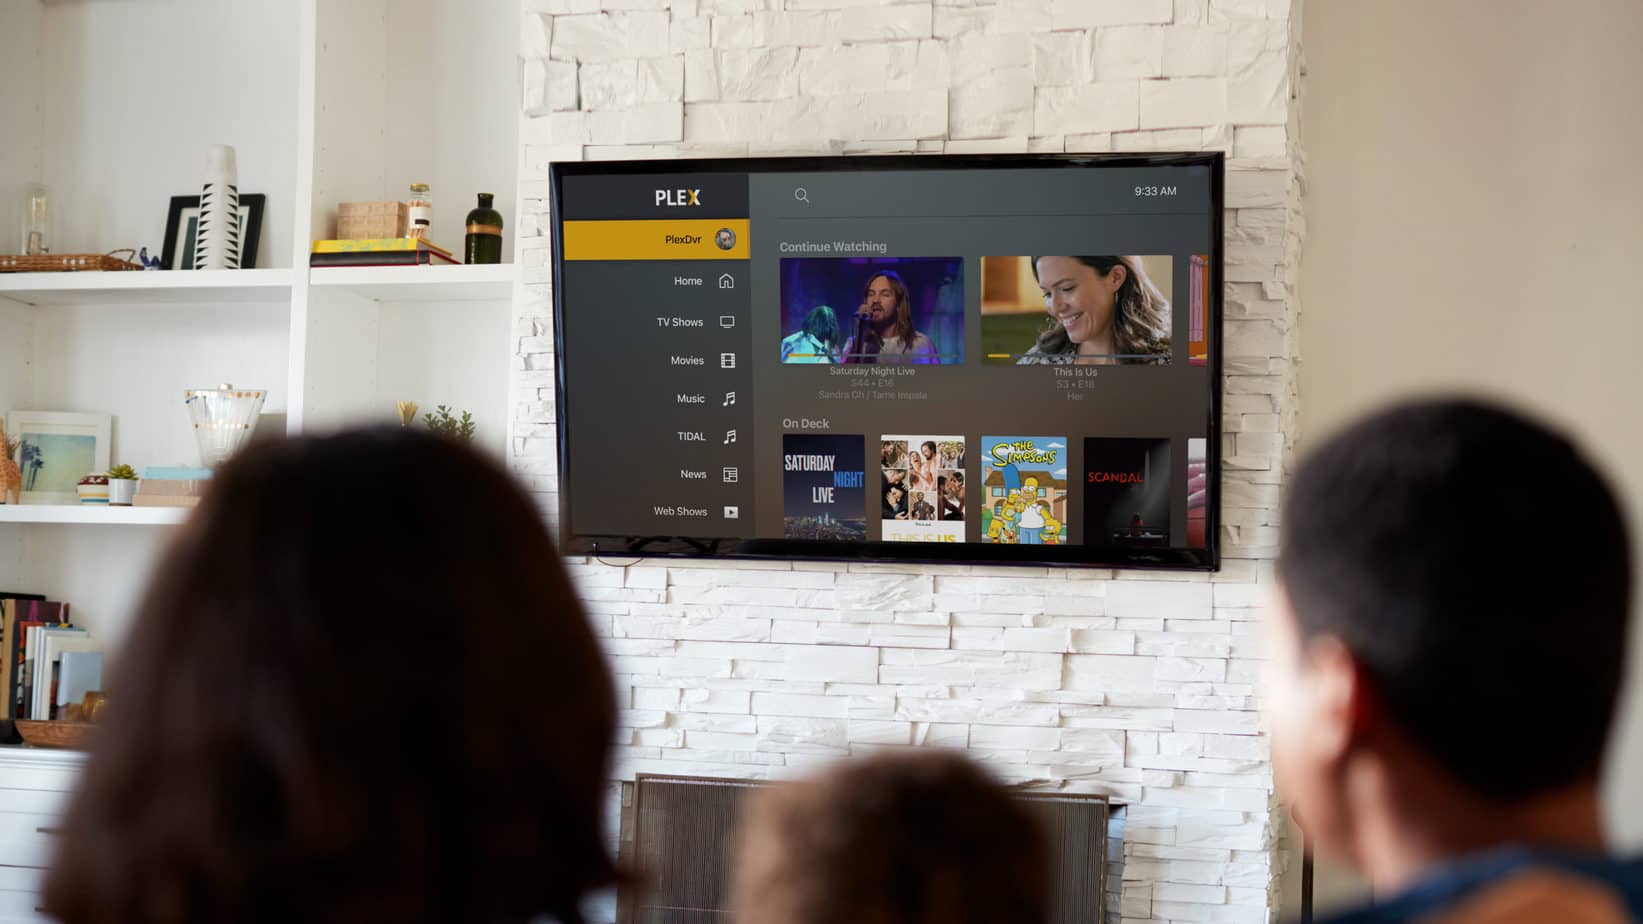 how to connect to plex media server over internet